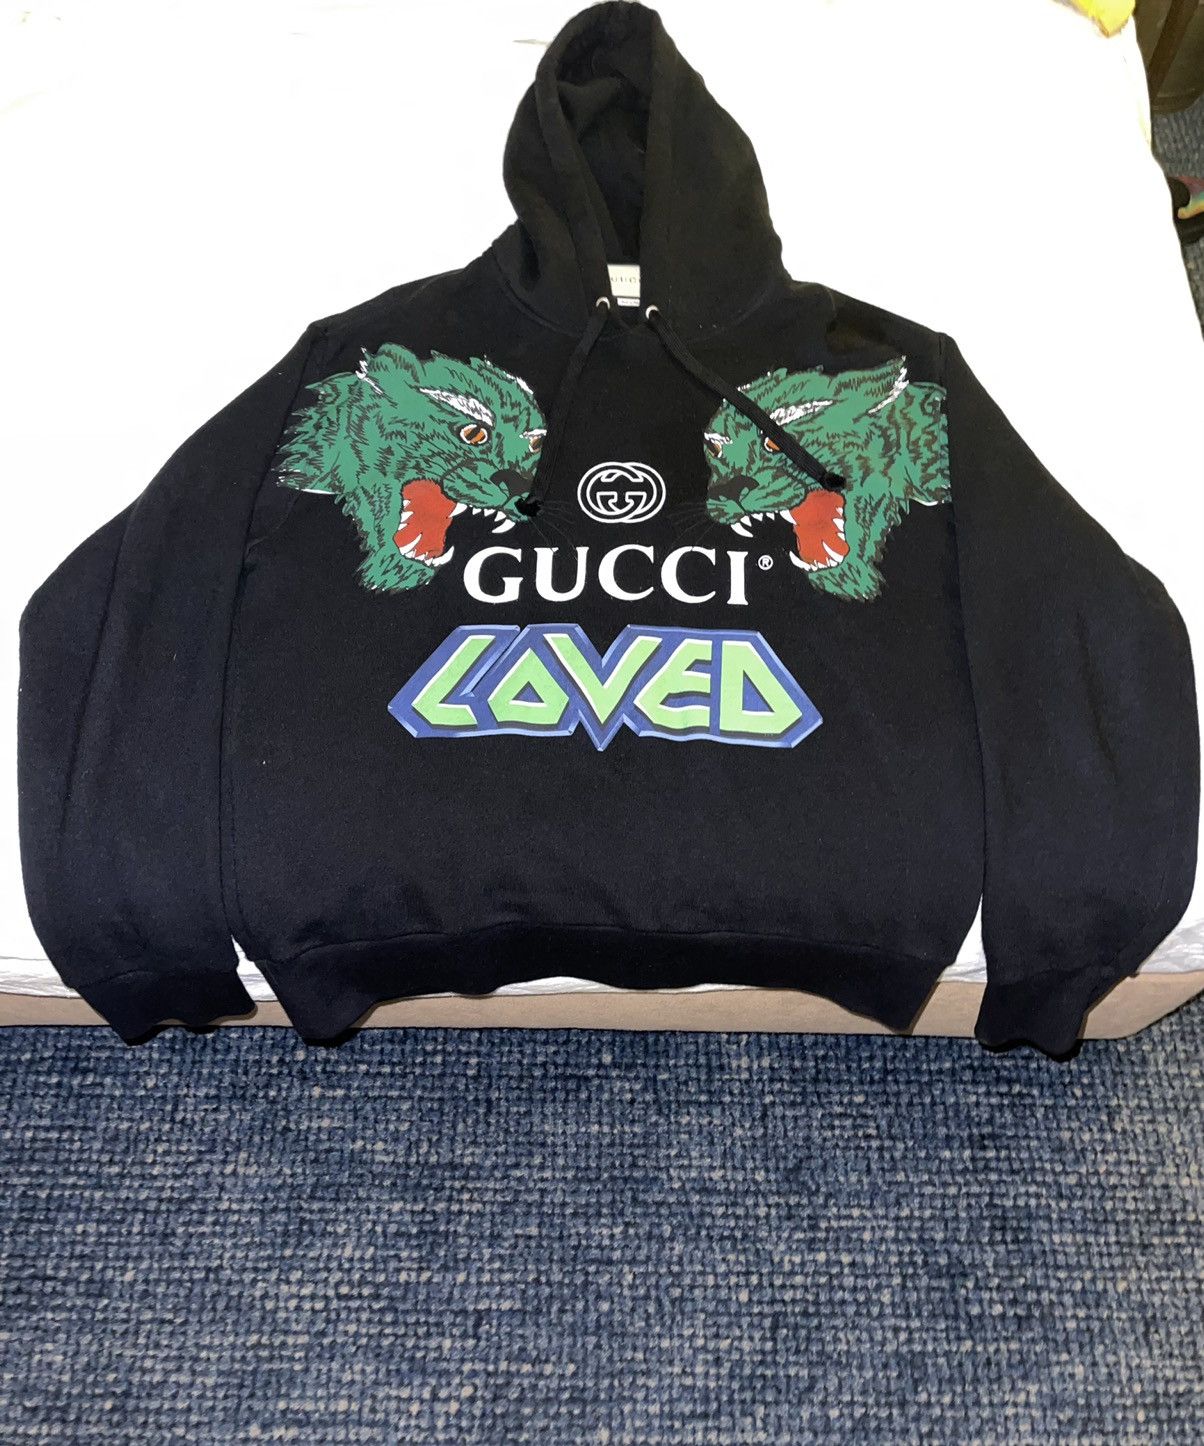 Gucci Gucci LOVED Hoodie Size US S / EU 44-46 / 1 - 3 Thumbnail